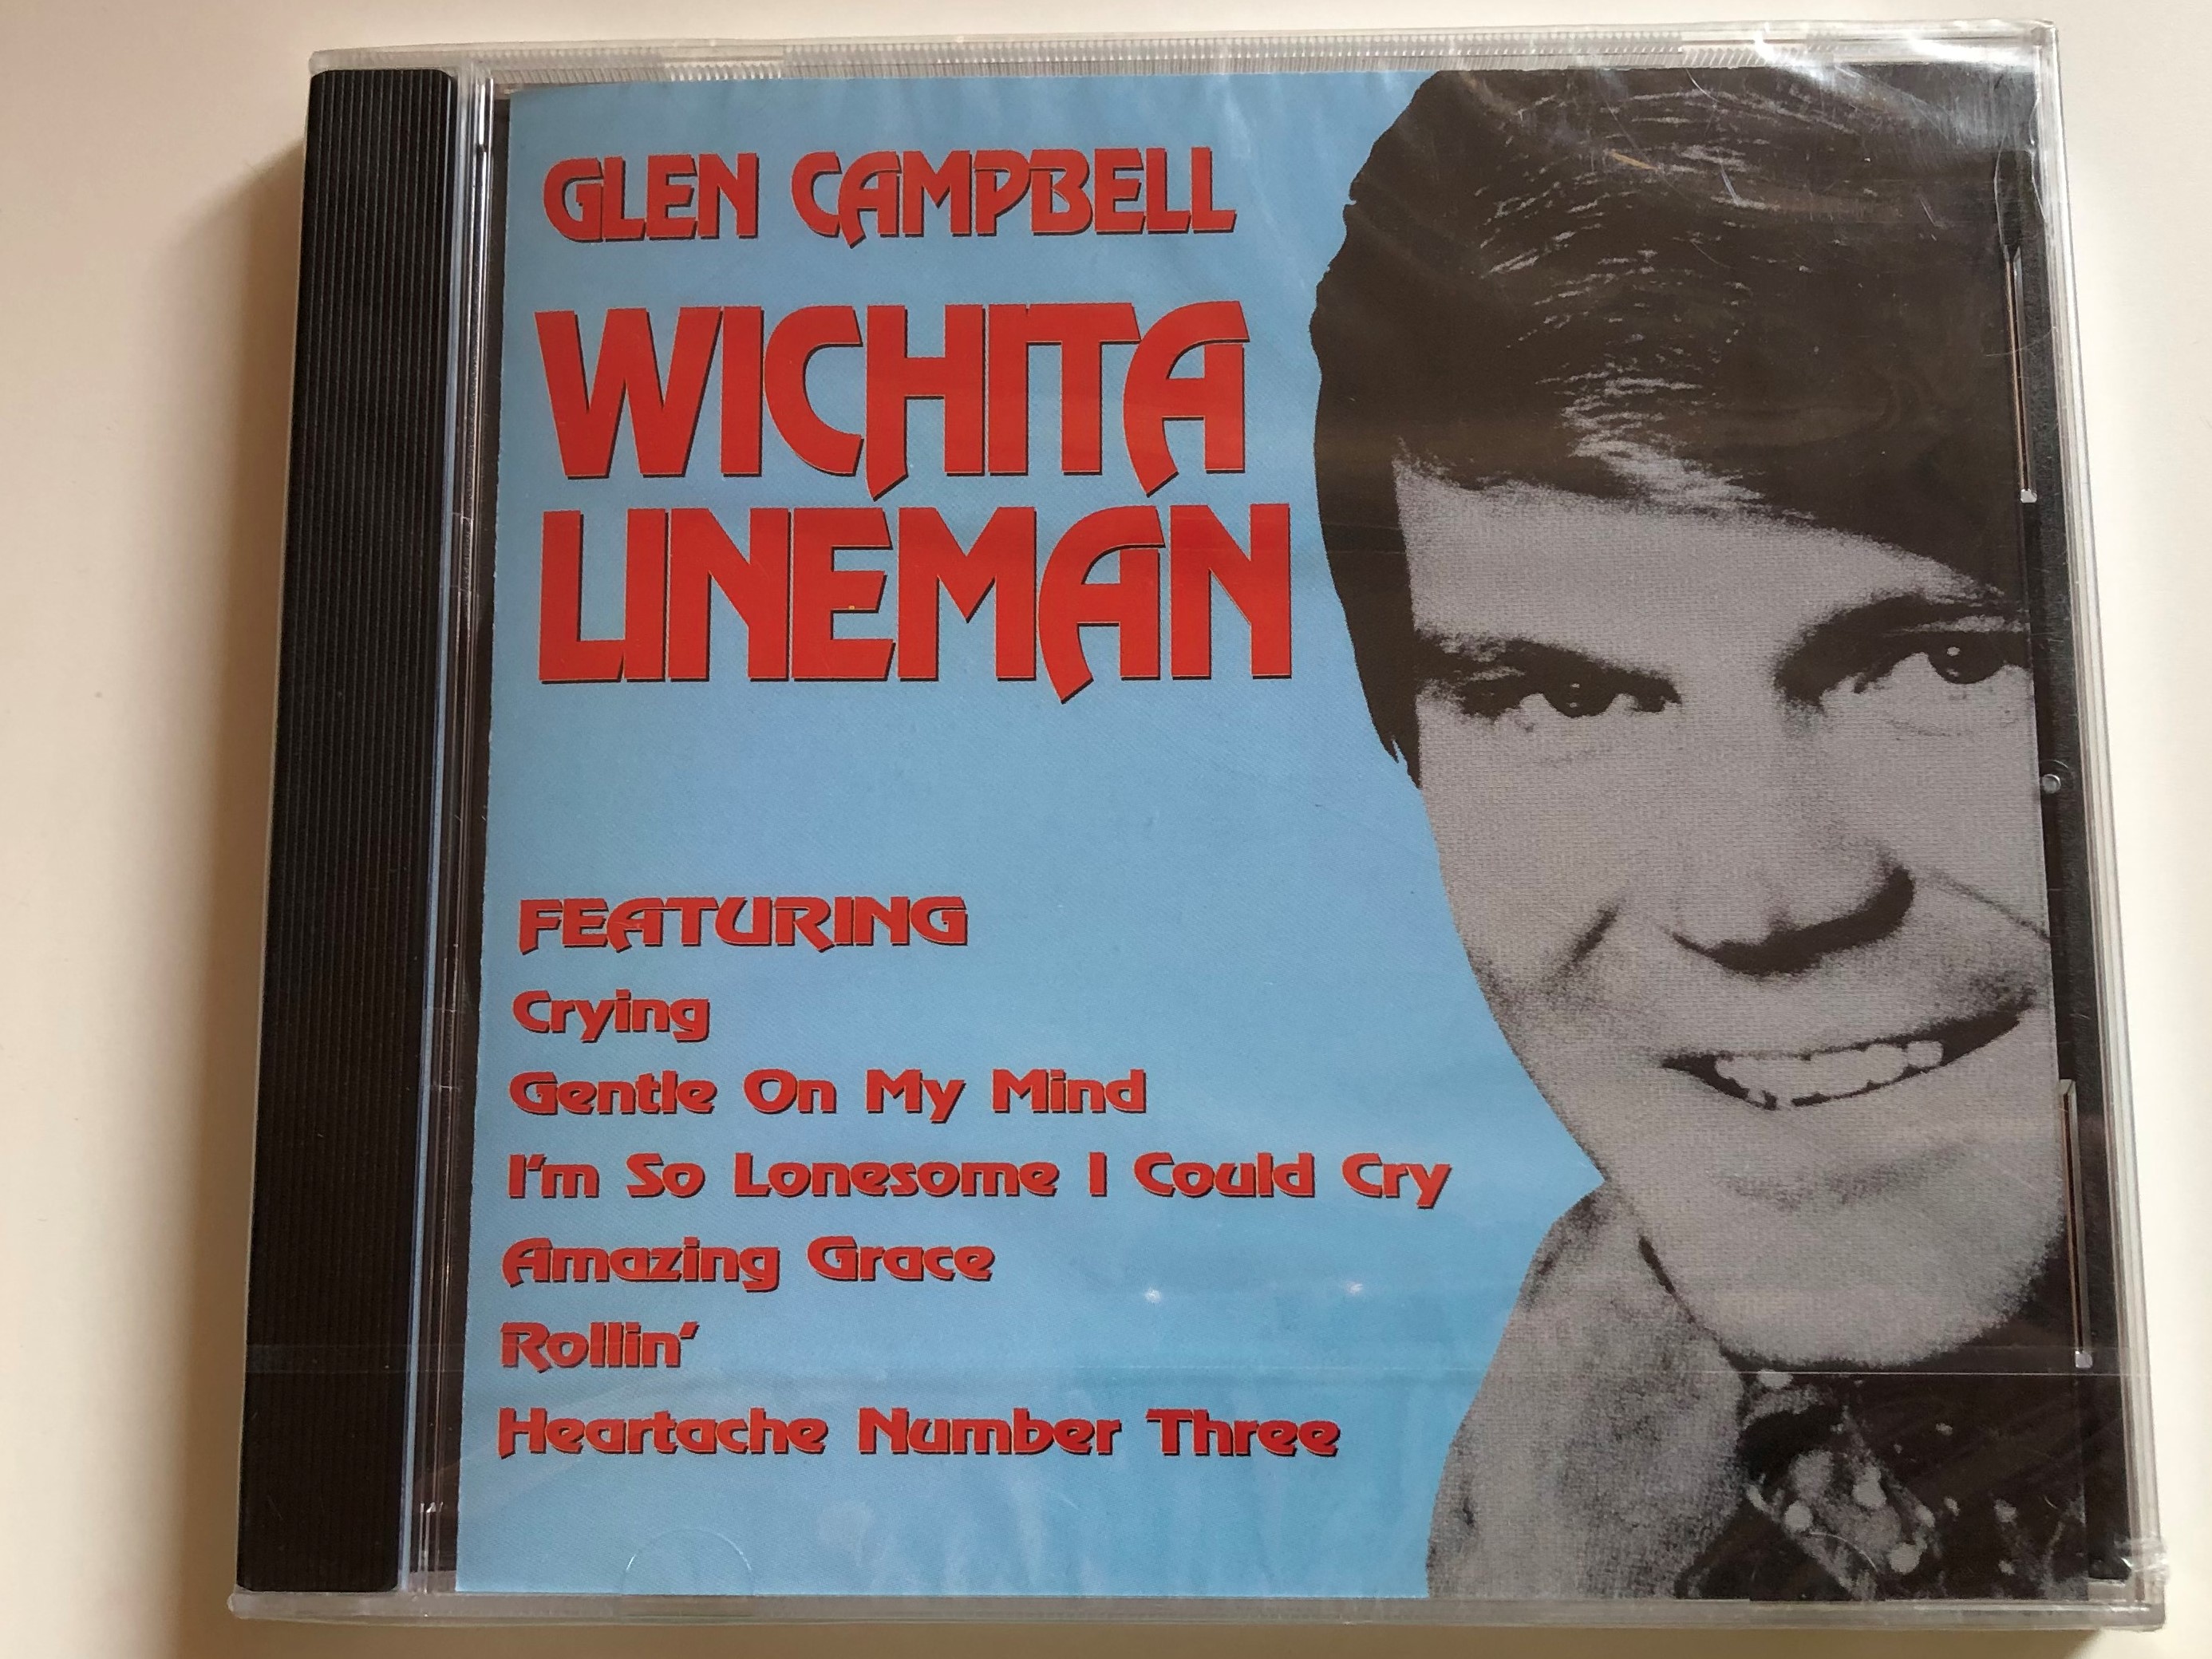 glen-campbell-wichita-lineman-featuring-crying-gentle-on-my-mind-i-m-so-lonesome-i-could-cry-amazing-grace-rollin-heartache-number-three-dressed-to-kill-audio-cd-1999-metro320-1-.jpg